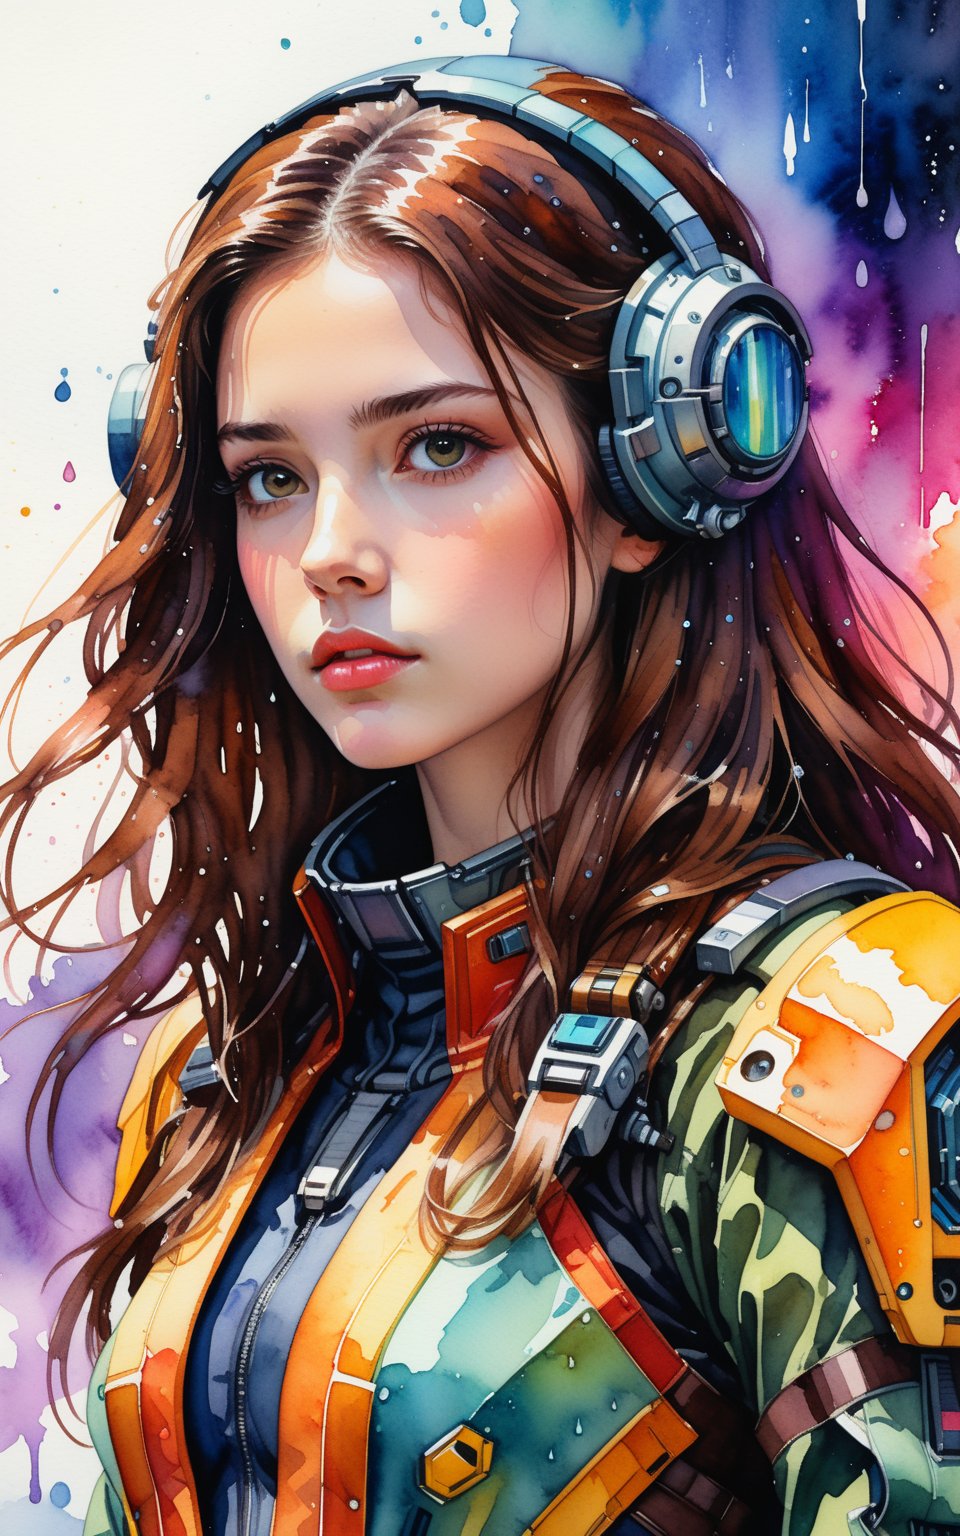 A contemplative young woman with long, brown locks and a subtle mole above her lip gazes directly at the viewer from a solo frame. Her closed mouth conveys a sense of introspection as she stands in front of a vibrant,
She wears a cyberpunk spacecraft pilot suit, adorned with mecha elements, conveying a sense of strength and vulnerability. 
 watercolor-inspired backdrop featuring abstract splashes of color, evoking the gentle patter of raindrops.